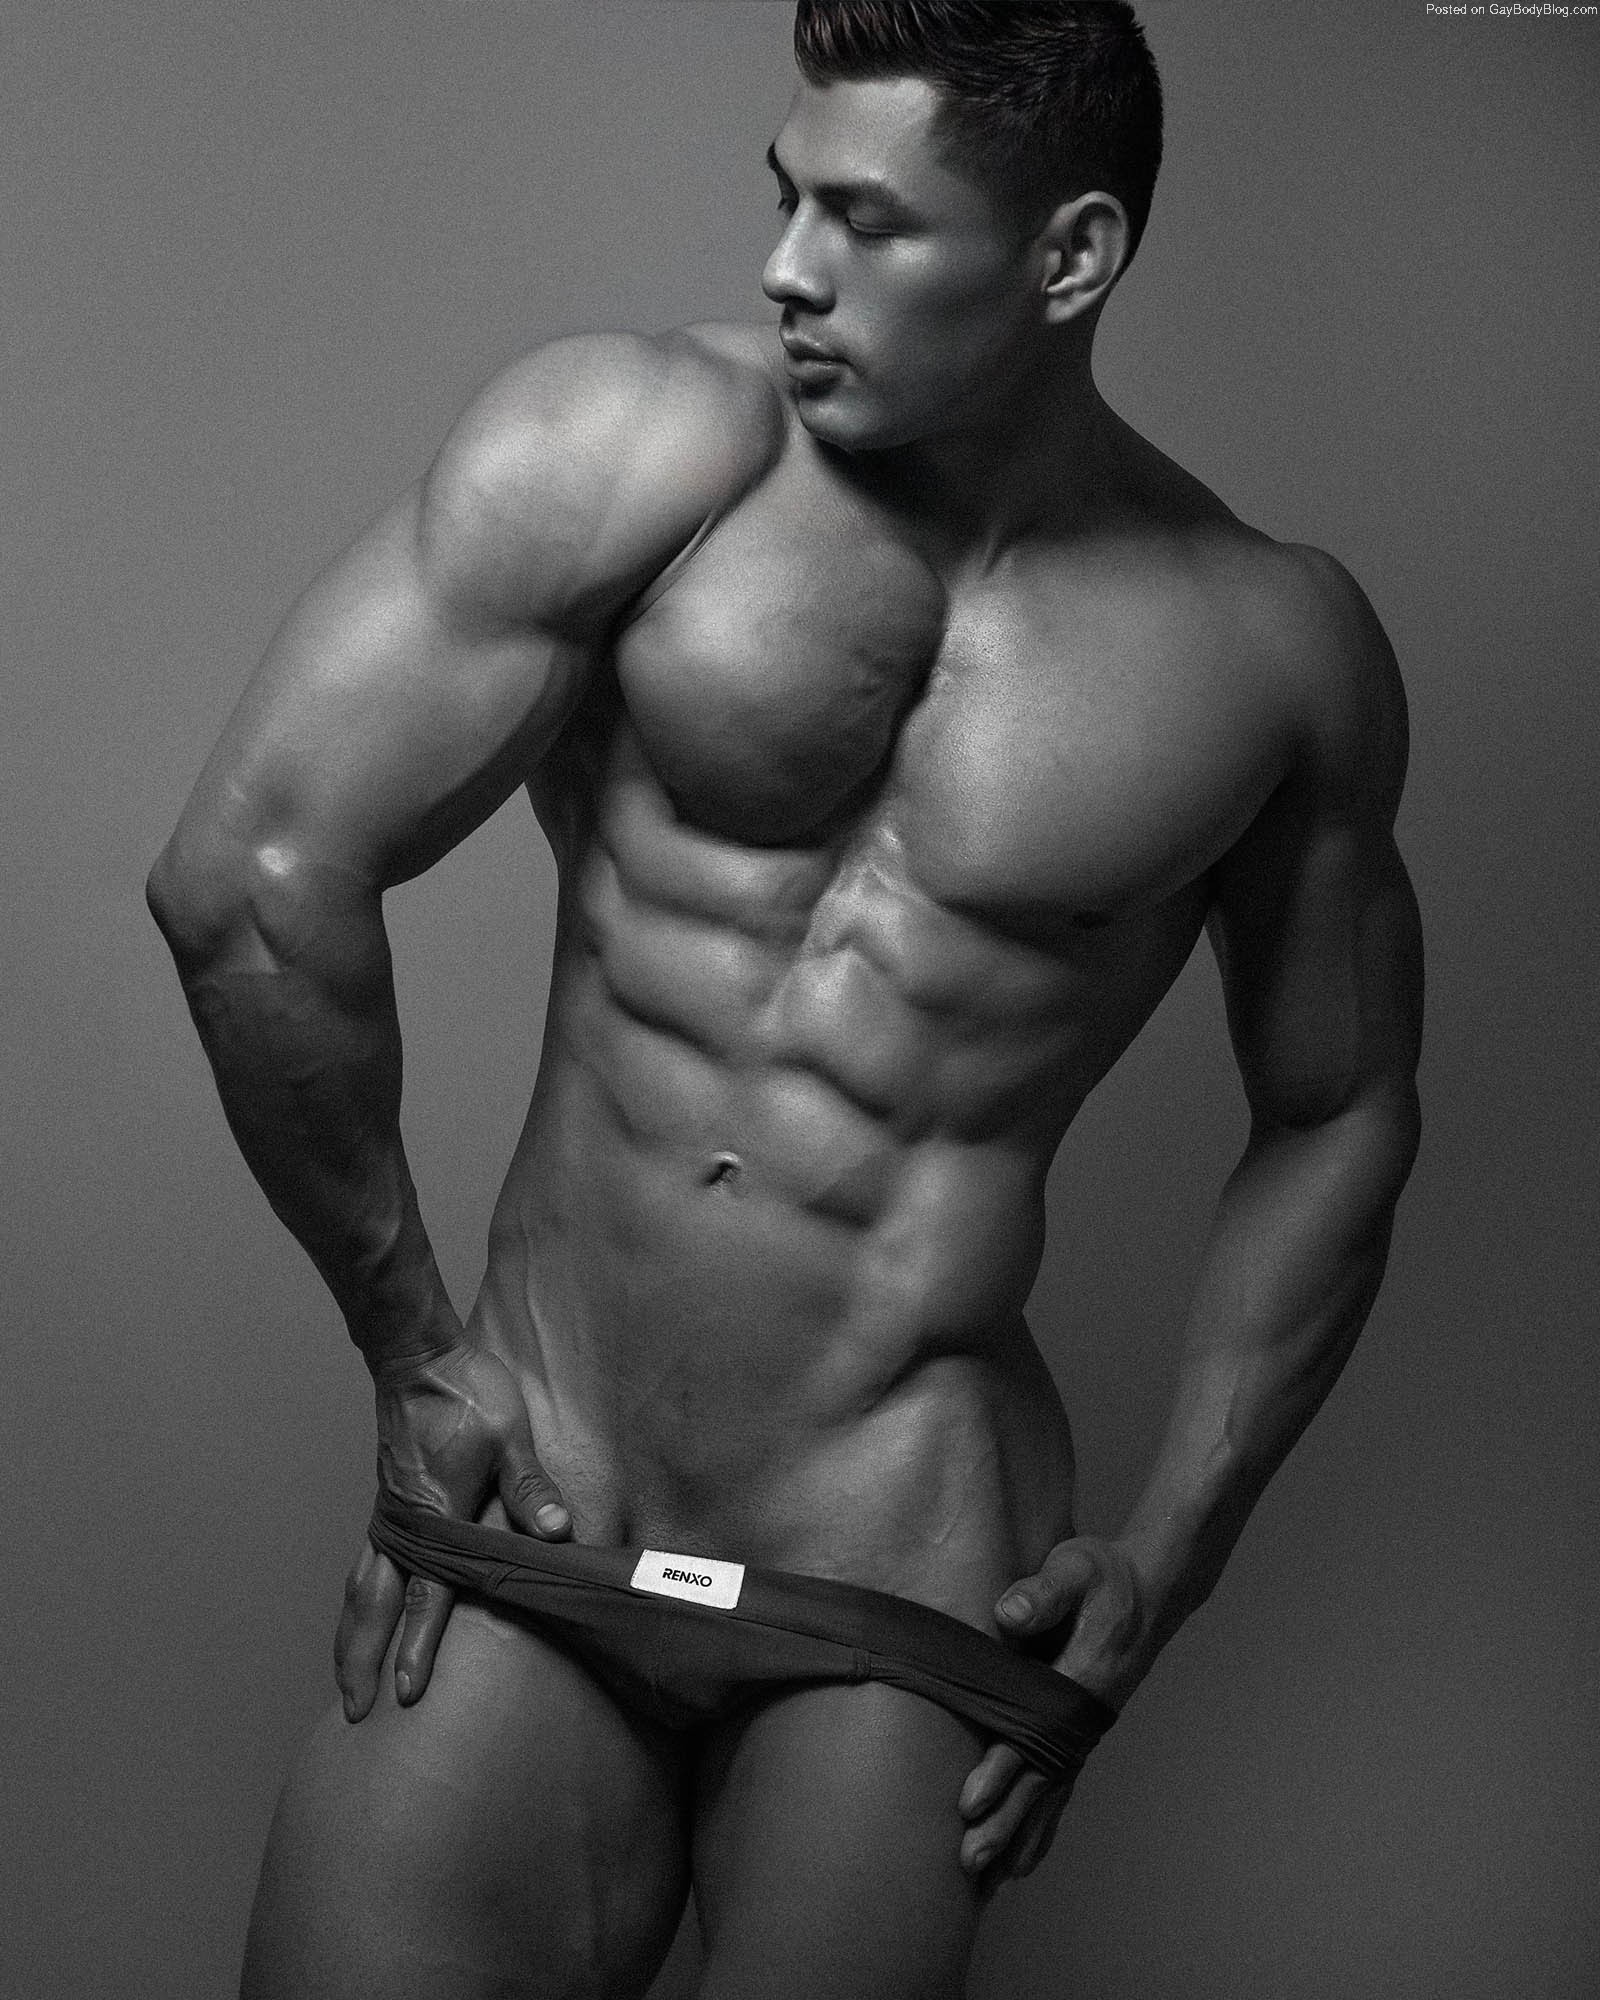 Hunk Dick Matews Is One For All The Physique Fans | Daily Dudes @ Dude Dump